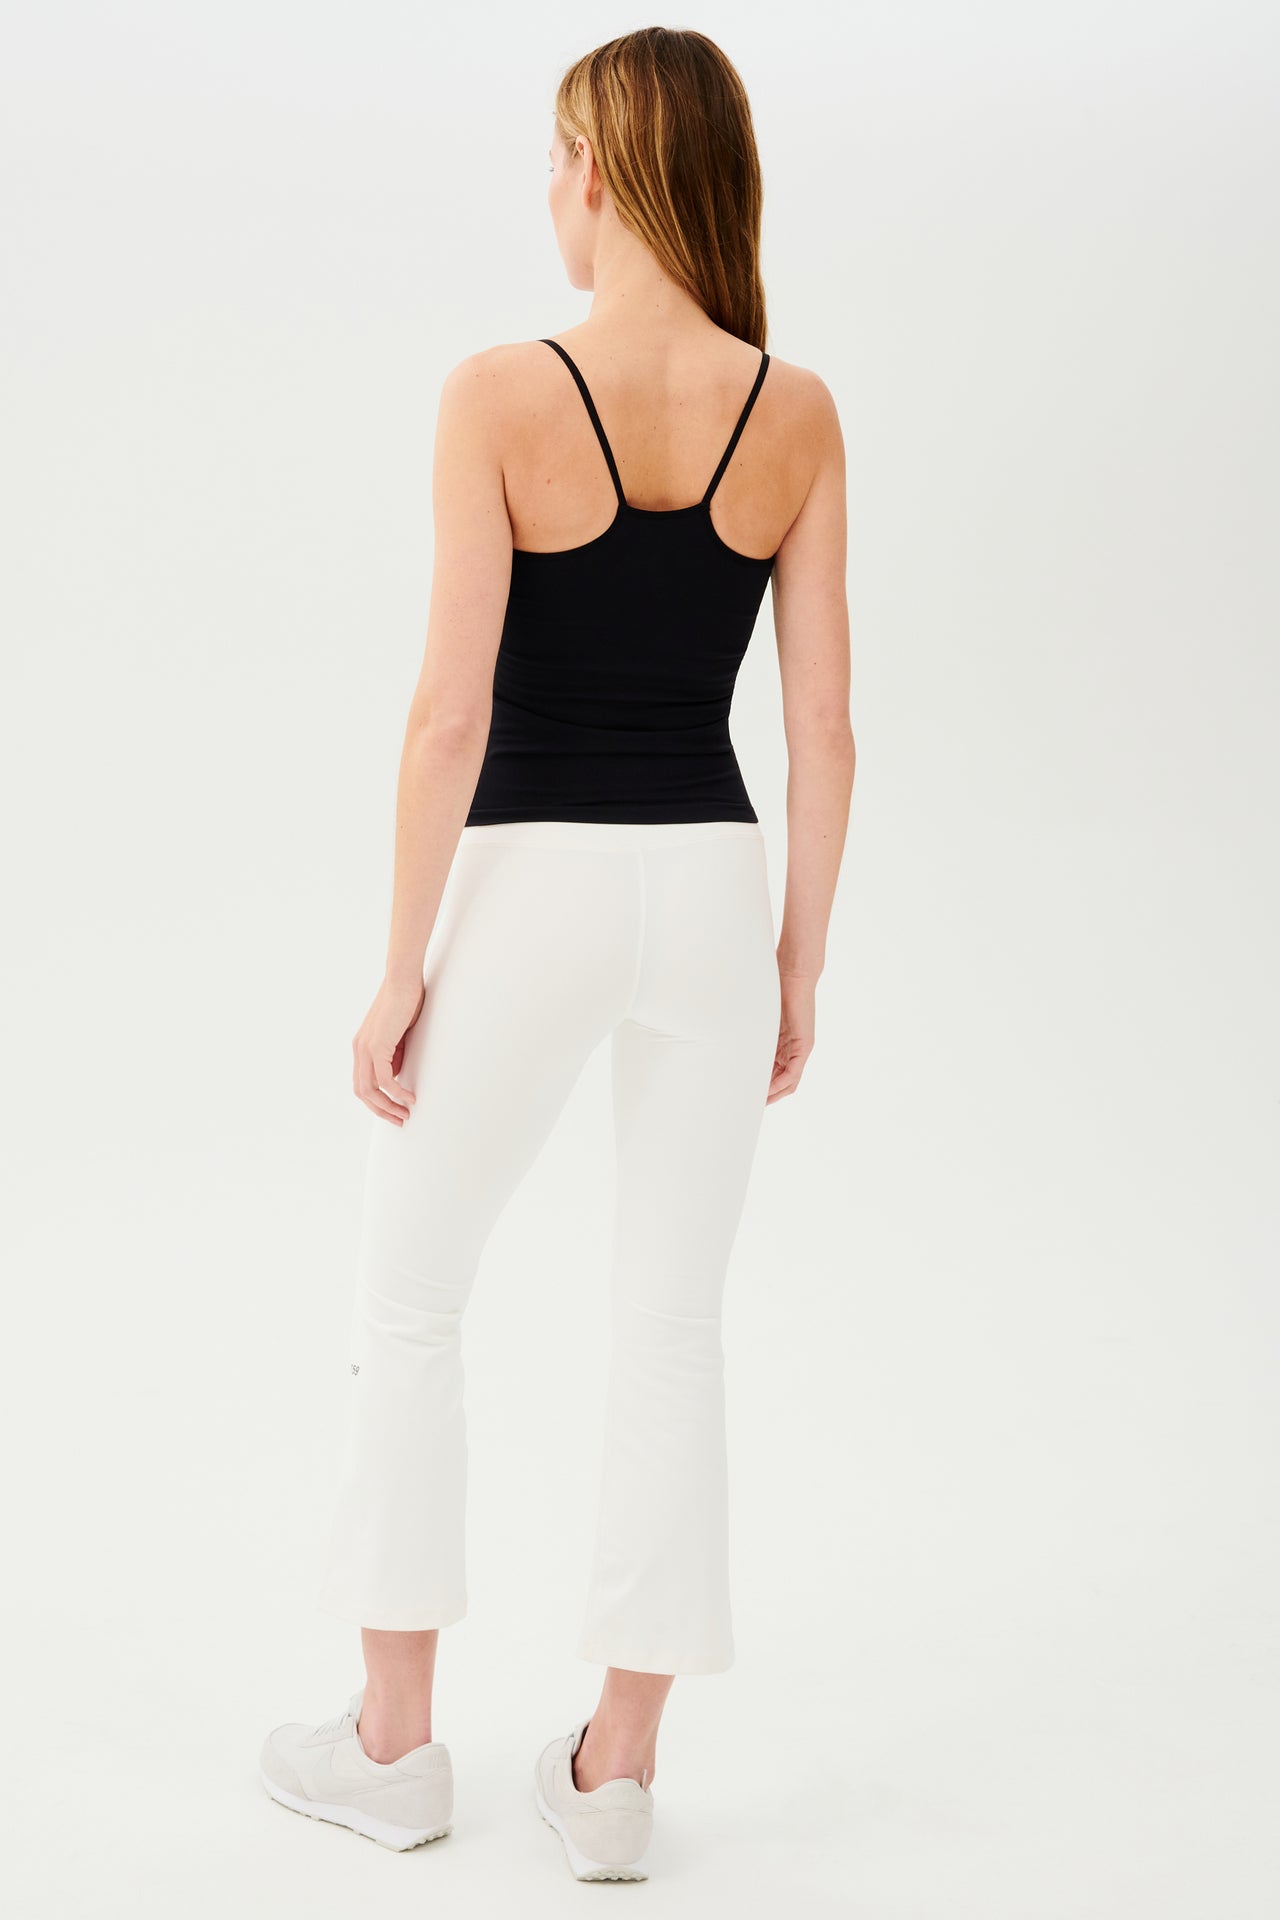 The back view of a woman wearing a black tank top and white SPLITS59 Raquel High Waist Crop.